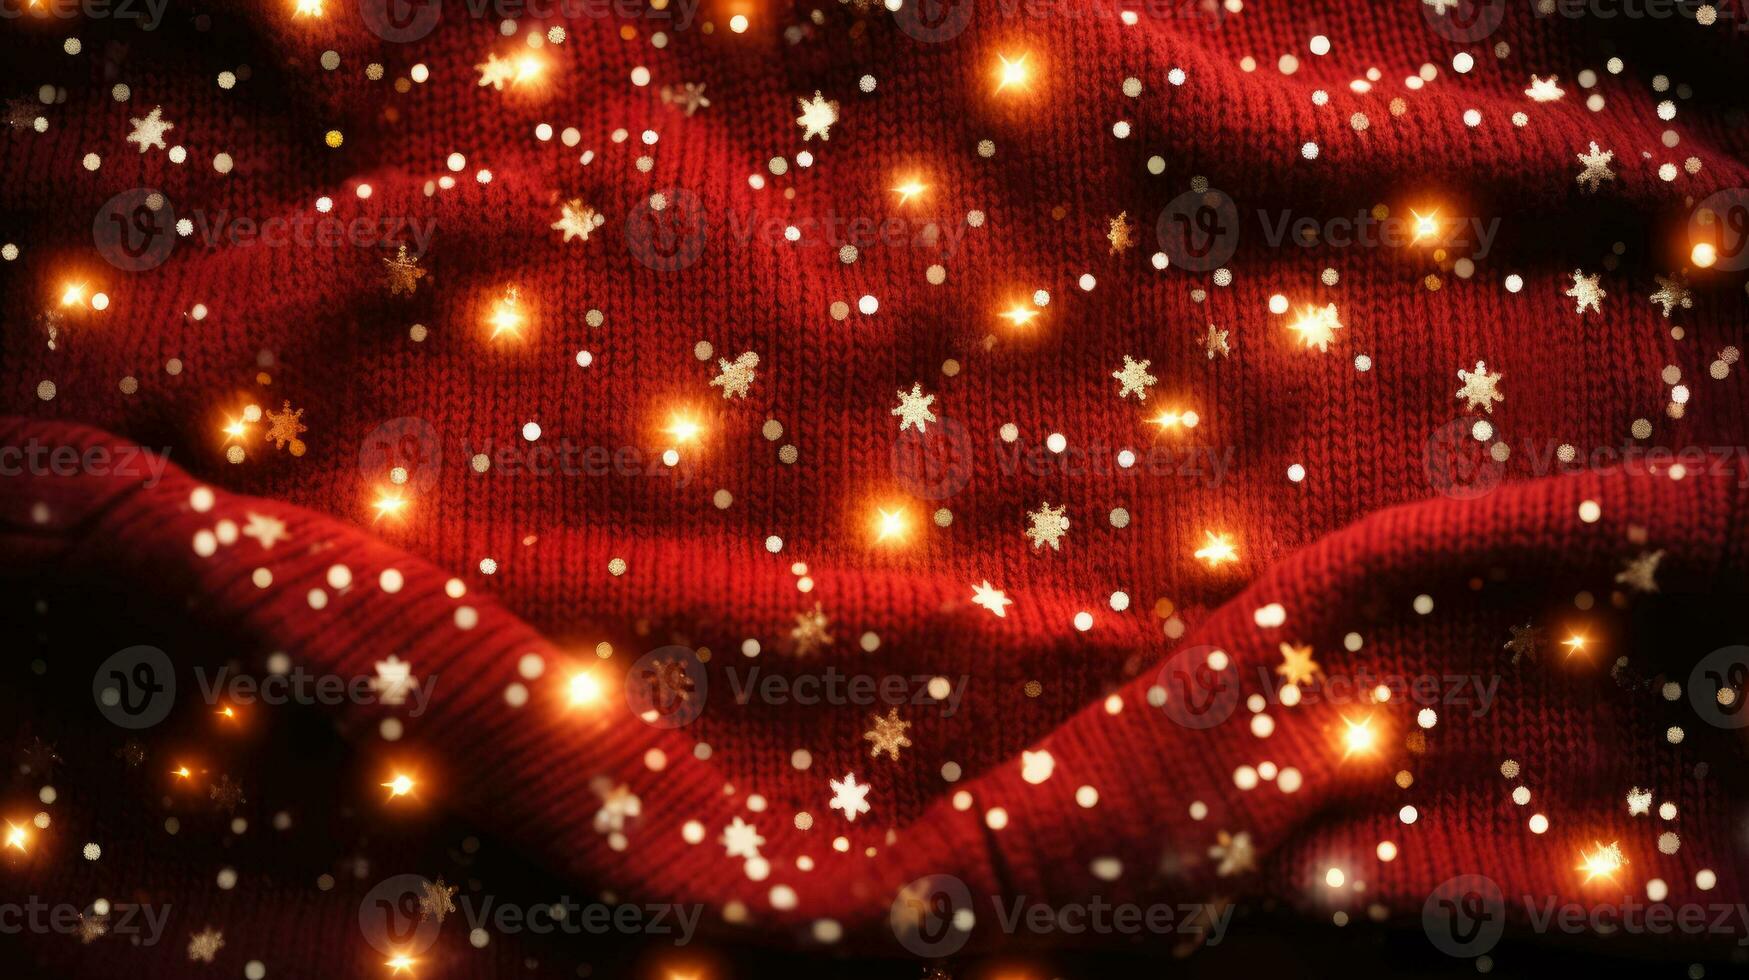 Vibrant holiday-themed sweater texture with twinkling lights photo